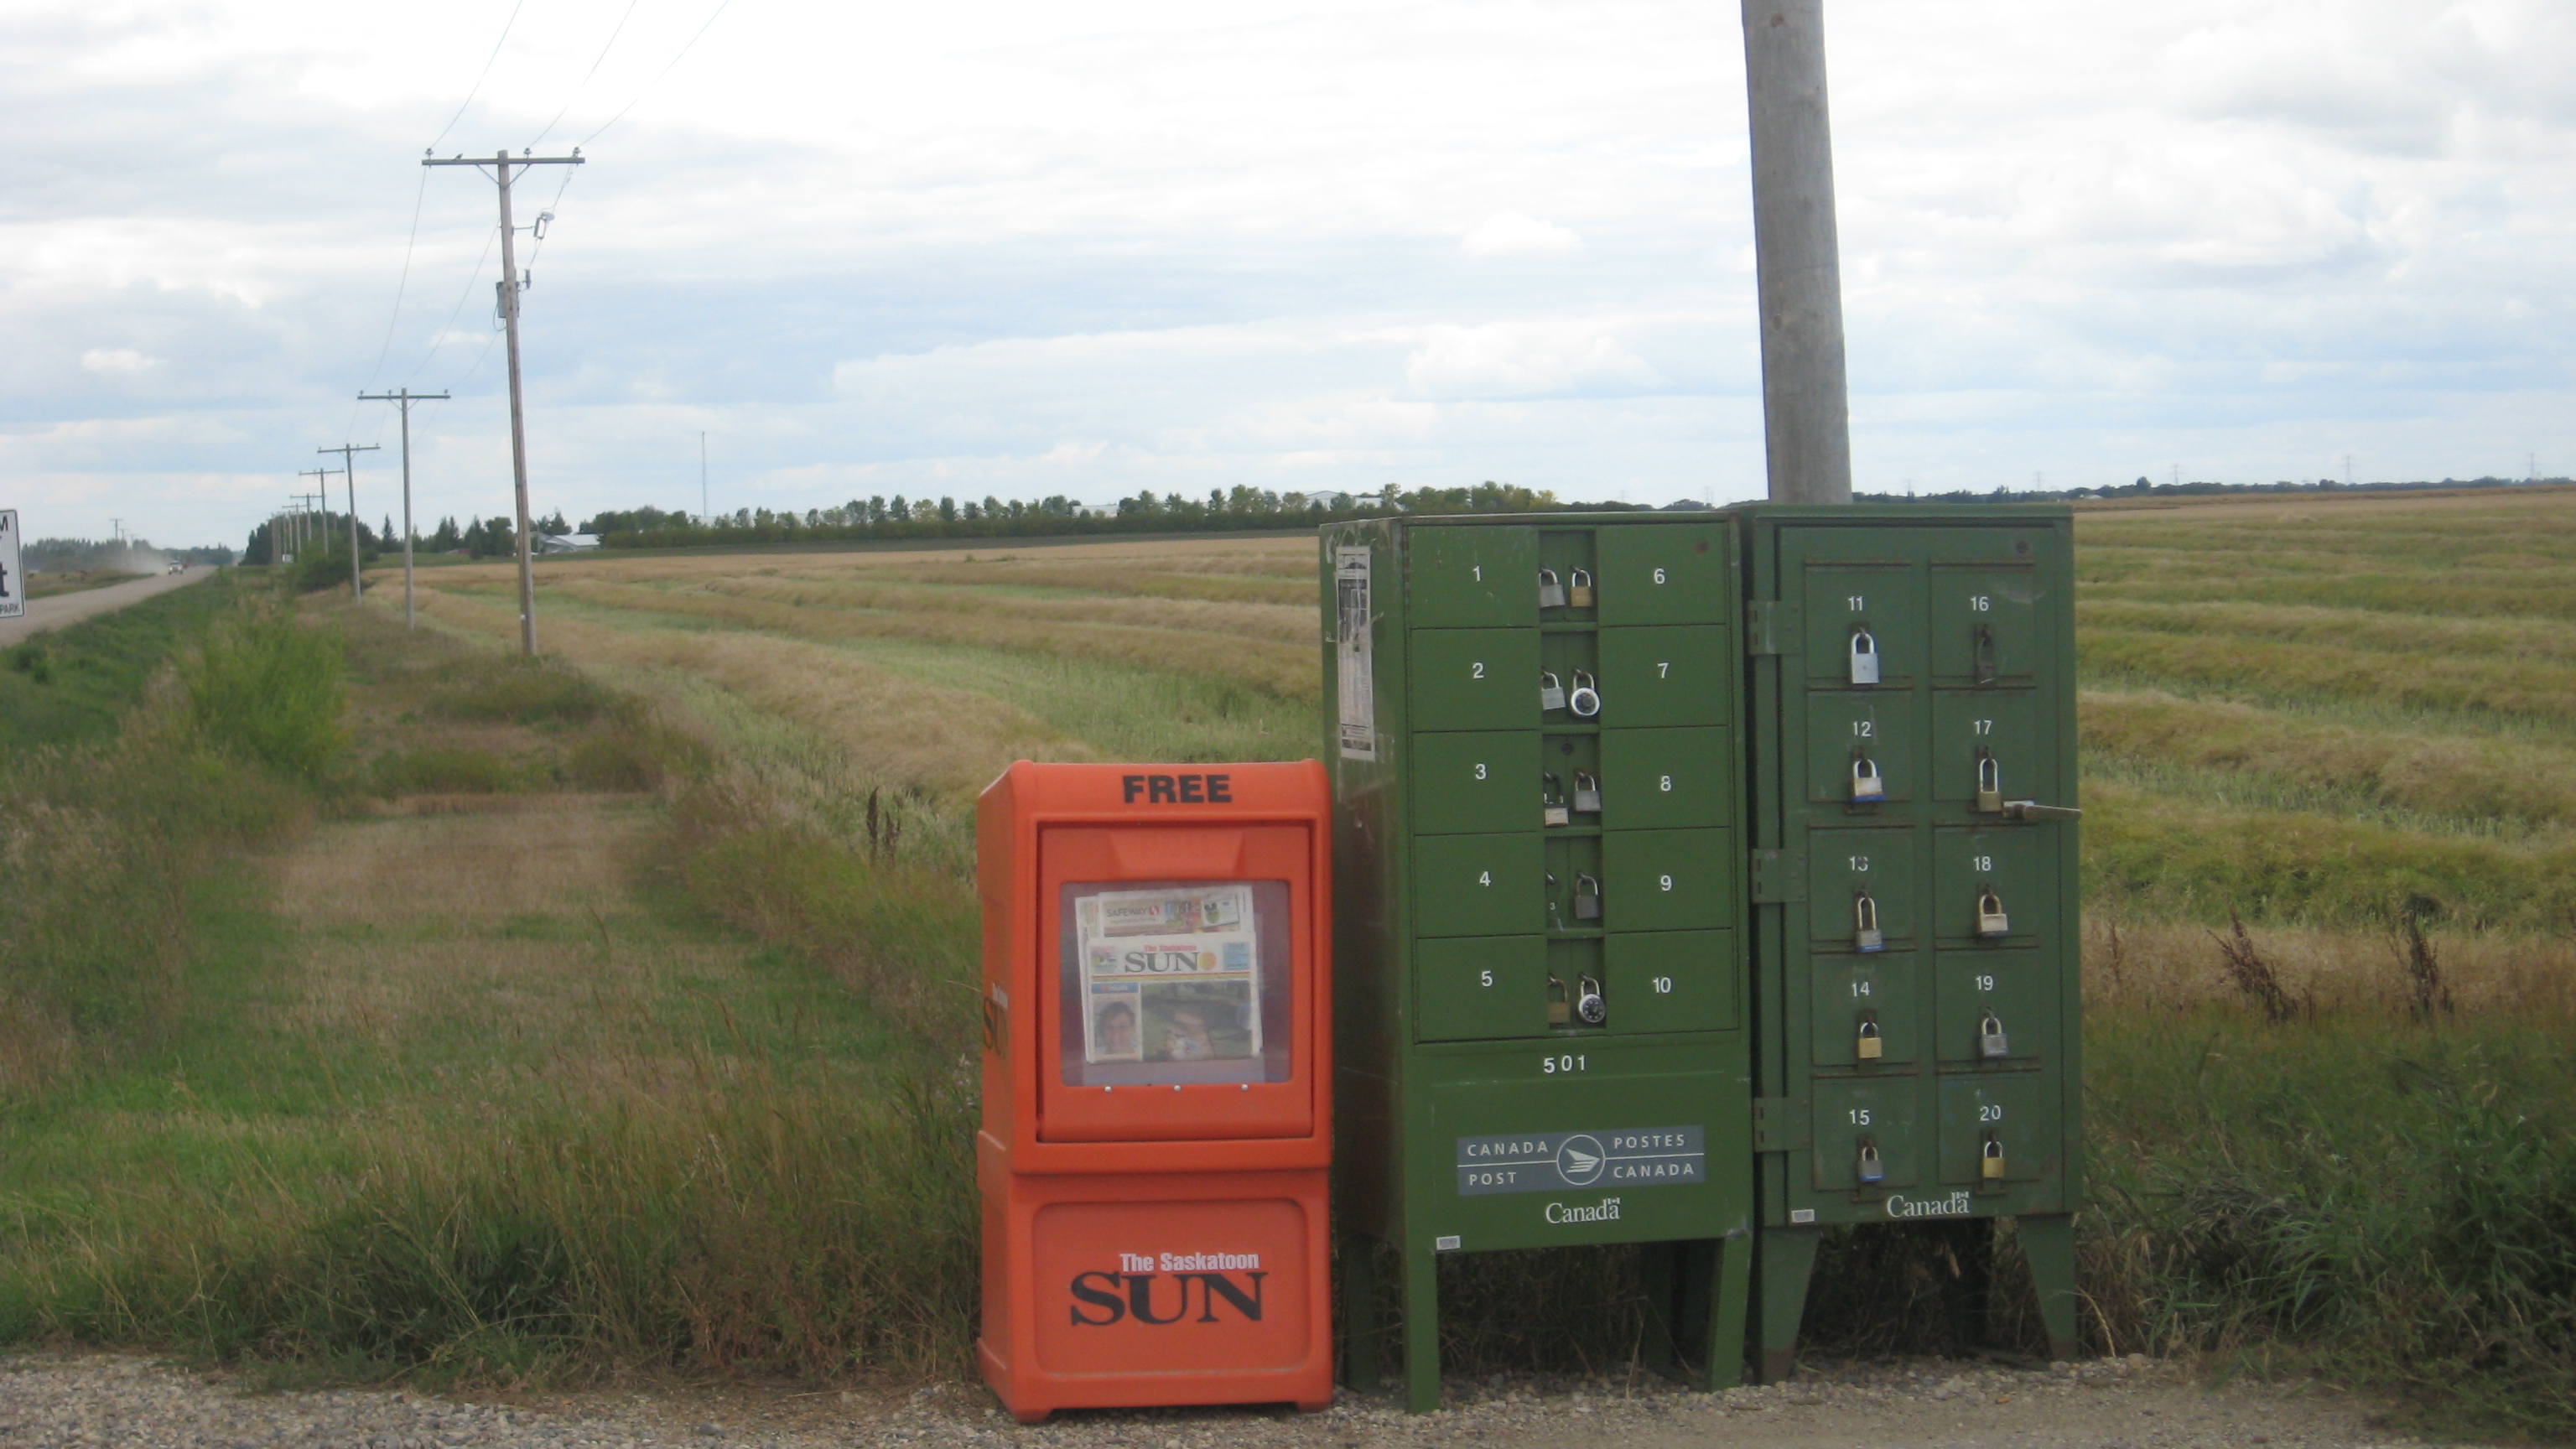 File:Canadian rural mailboxes.jpg - Wikimedia Commons